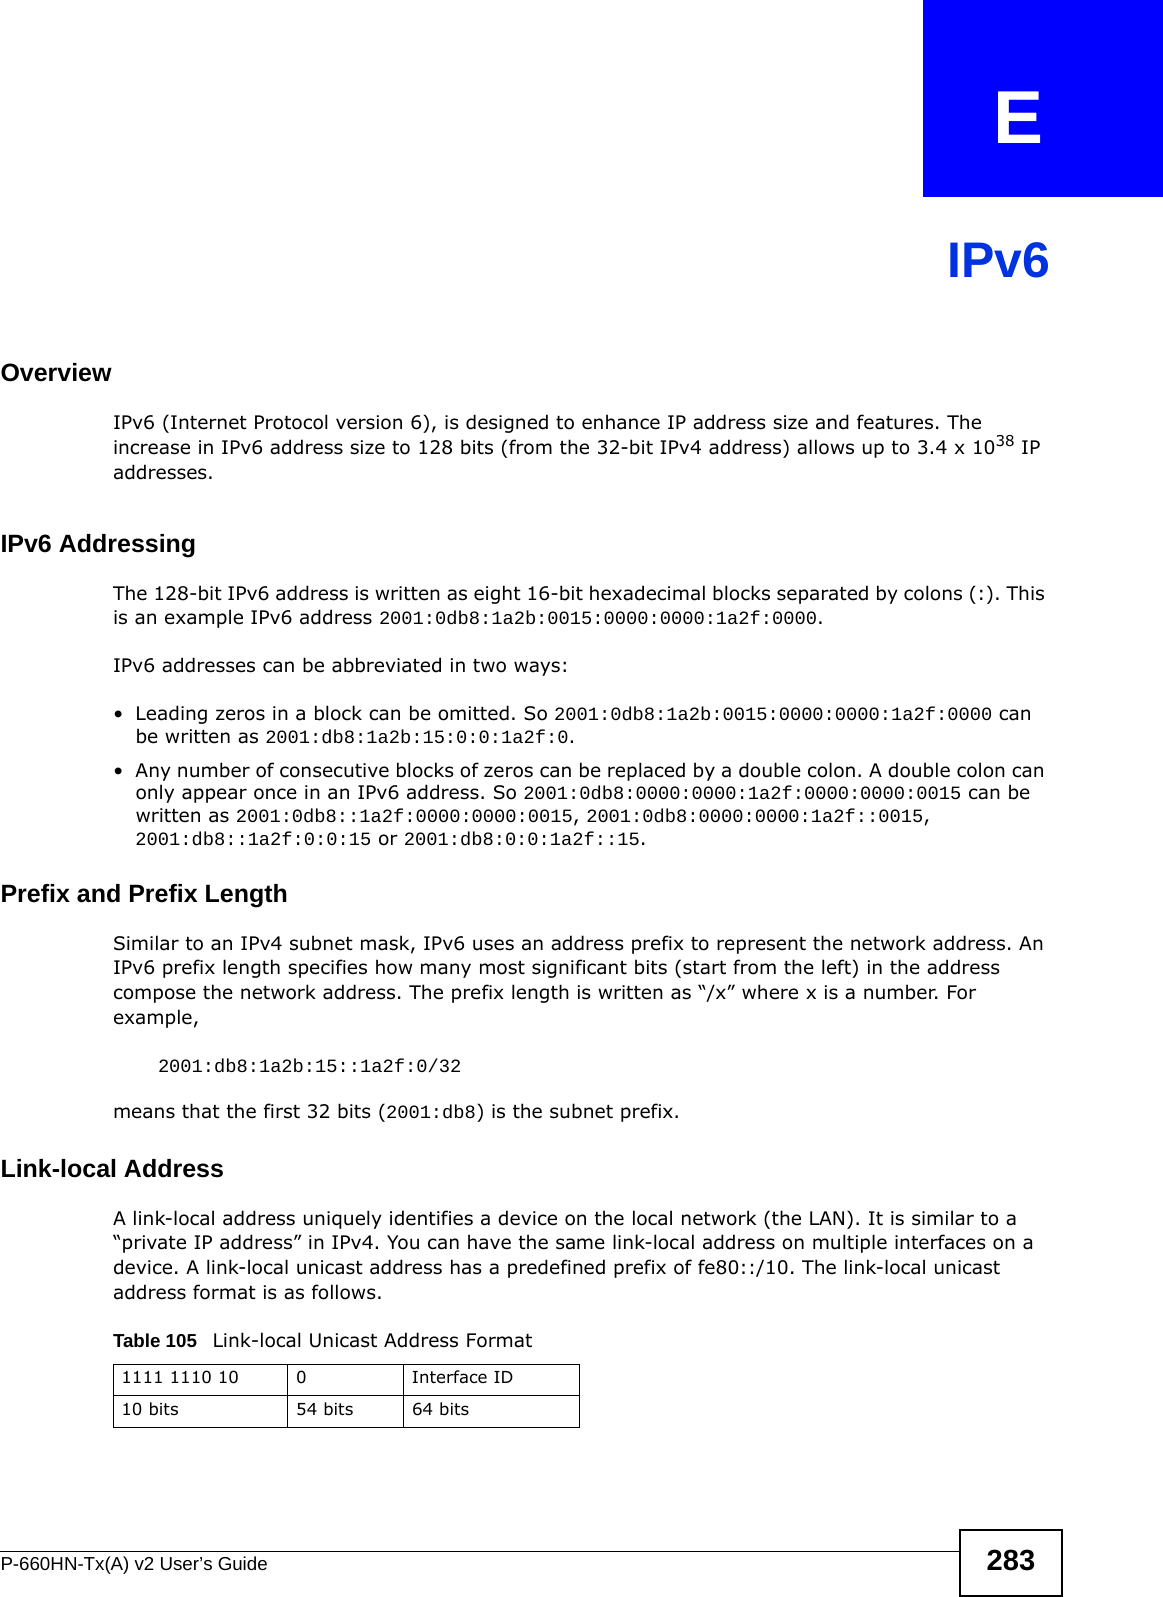 P-660HN-Tx(A) v2 User’s Guide 283APPENDIX   EIPv6OverviewIPv6 (Internet Protocol version 6), is designed to enhance IP address size and features. The increase in IPv6 address size to 128 bits (from the 32-bit IPv4 address) allows up to 3.4 x 1038 IP addresses. IPv6 AddressingThe 128-bit IPv6 address is written as eight 16-bit hexadecimal blocks separated by colons (:). This is an example IPv6 address 2001:0db8:1a2b:0015:0000:0000:1a2f:0000. IPv6 addresses can be abbreviated in two ways:• Leading zeros in a block can be omitted. So 2001:0db8:1a2b:0015:0000:0000:1a2f:0000 can be written as 2001:db8:1a2b:15:0:0:1a2f:0. • Any number of consecutive blocks of zeros can be replaced by a double colon. A double colon can only appear once in an IPv6 address. So 2001:0db8:0000:0000:1a2f:0000:0000:0015 can be written as 2001:0db8::1a2f:0000:0000:0015, 2001:0db8:0000:0000:1a2f::0015, 2001:db8::1a2f:0:0:15 or 2001:db8:0:0:1a2f::15.Prefix and Prefix LengthSimilar to an IPv4 subnet mask, IPv6 uses an address prefix to represent the network address. An IPv6 prefix length specifies how many most significant bits (start from the left) in the address compose the network address. The prefix length is written as “/x” where x is a number. For example, 2001:db8:1a2b:15::1a2f:0/32means that the first 32 bits (2001:db8) is the subnet prefix. Link-local AddressA link-local address uniquely identifies a device on the local network (the LAN). It is similar to a “private IP address” in IPv4. You can have the same link-local address on multiple interfaces on a device. A link-local unicast address has a predefined prefix of fe80::/10. The link-local unicast address format is as follows.Table 105   Link-local Unicast Address Format1111 1110 10 0 Interface ID10 bits 54 bits 64 bits